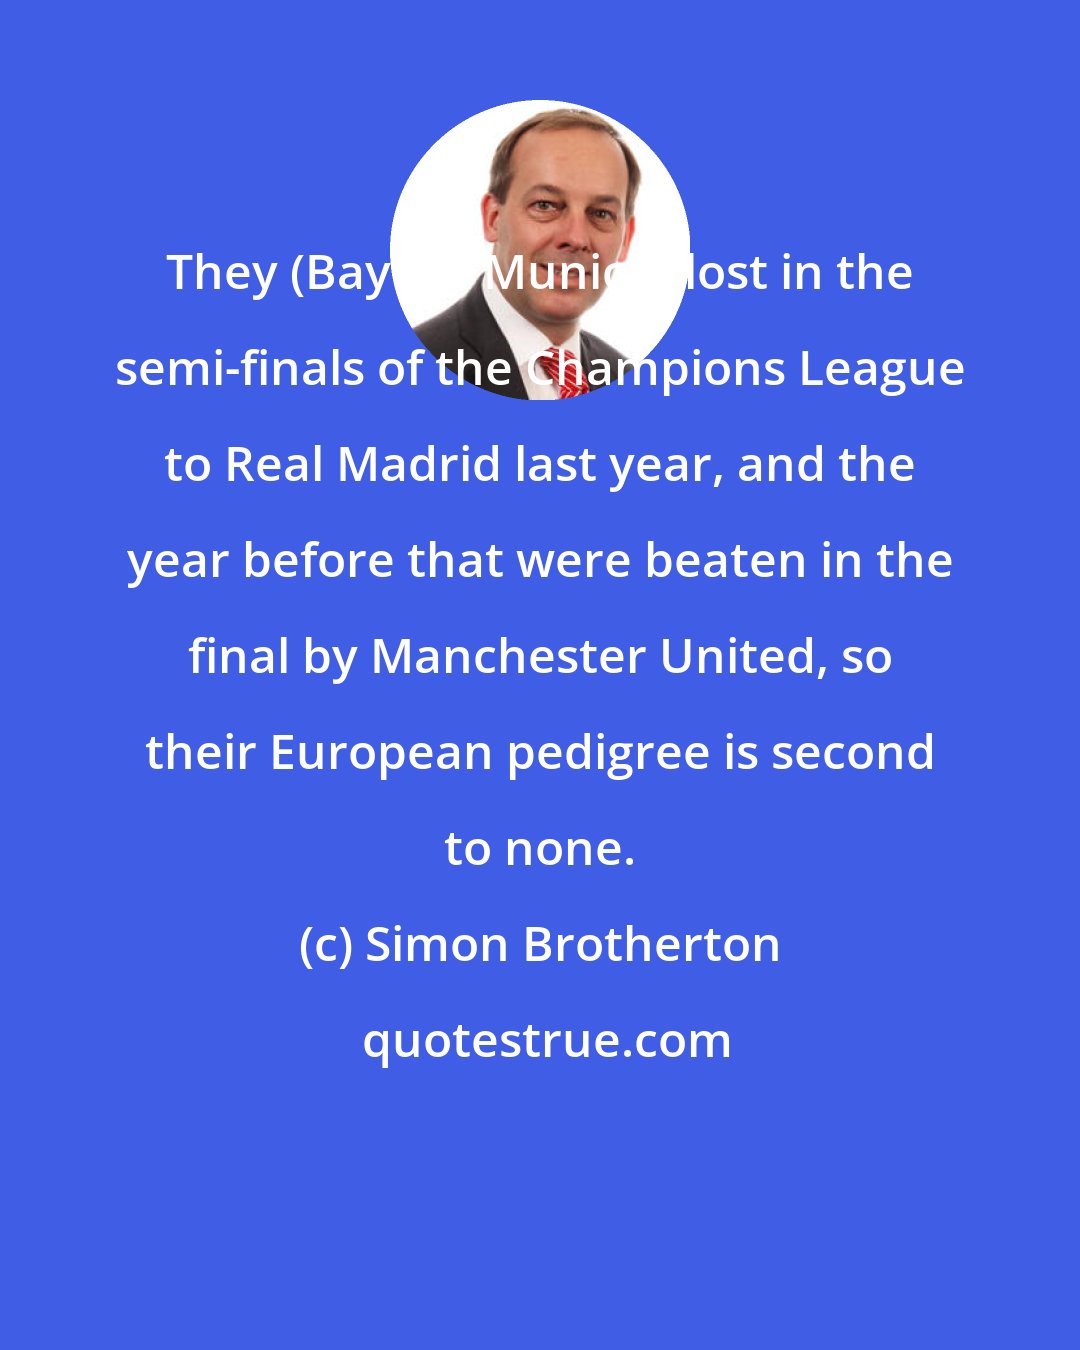 Simon Brotherton: They (Bayern Munich) lost in the semi-finals of the Champions League to Real Madrid last year, and the year before that were beaten in the final by Manchester United, so their European pedigree is second to none.